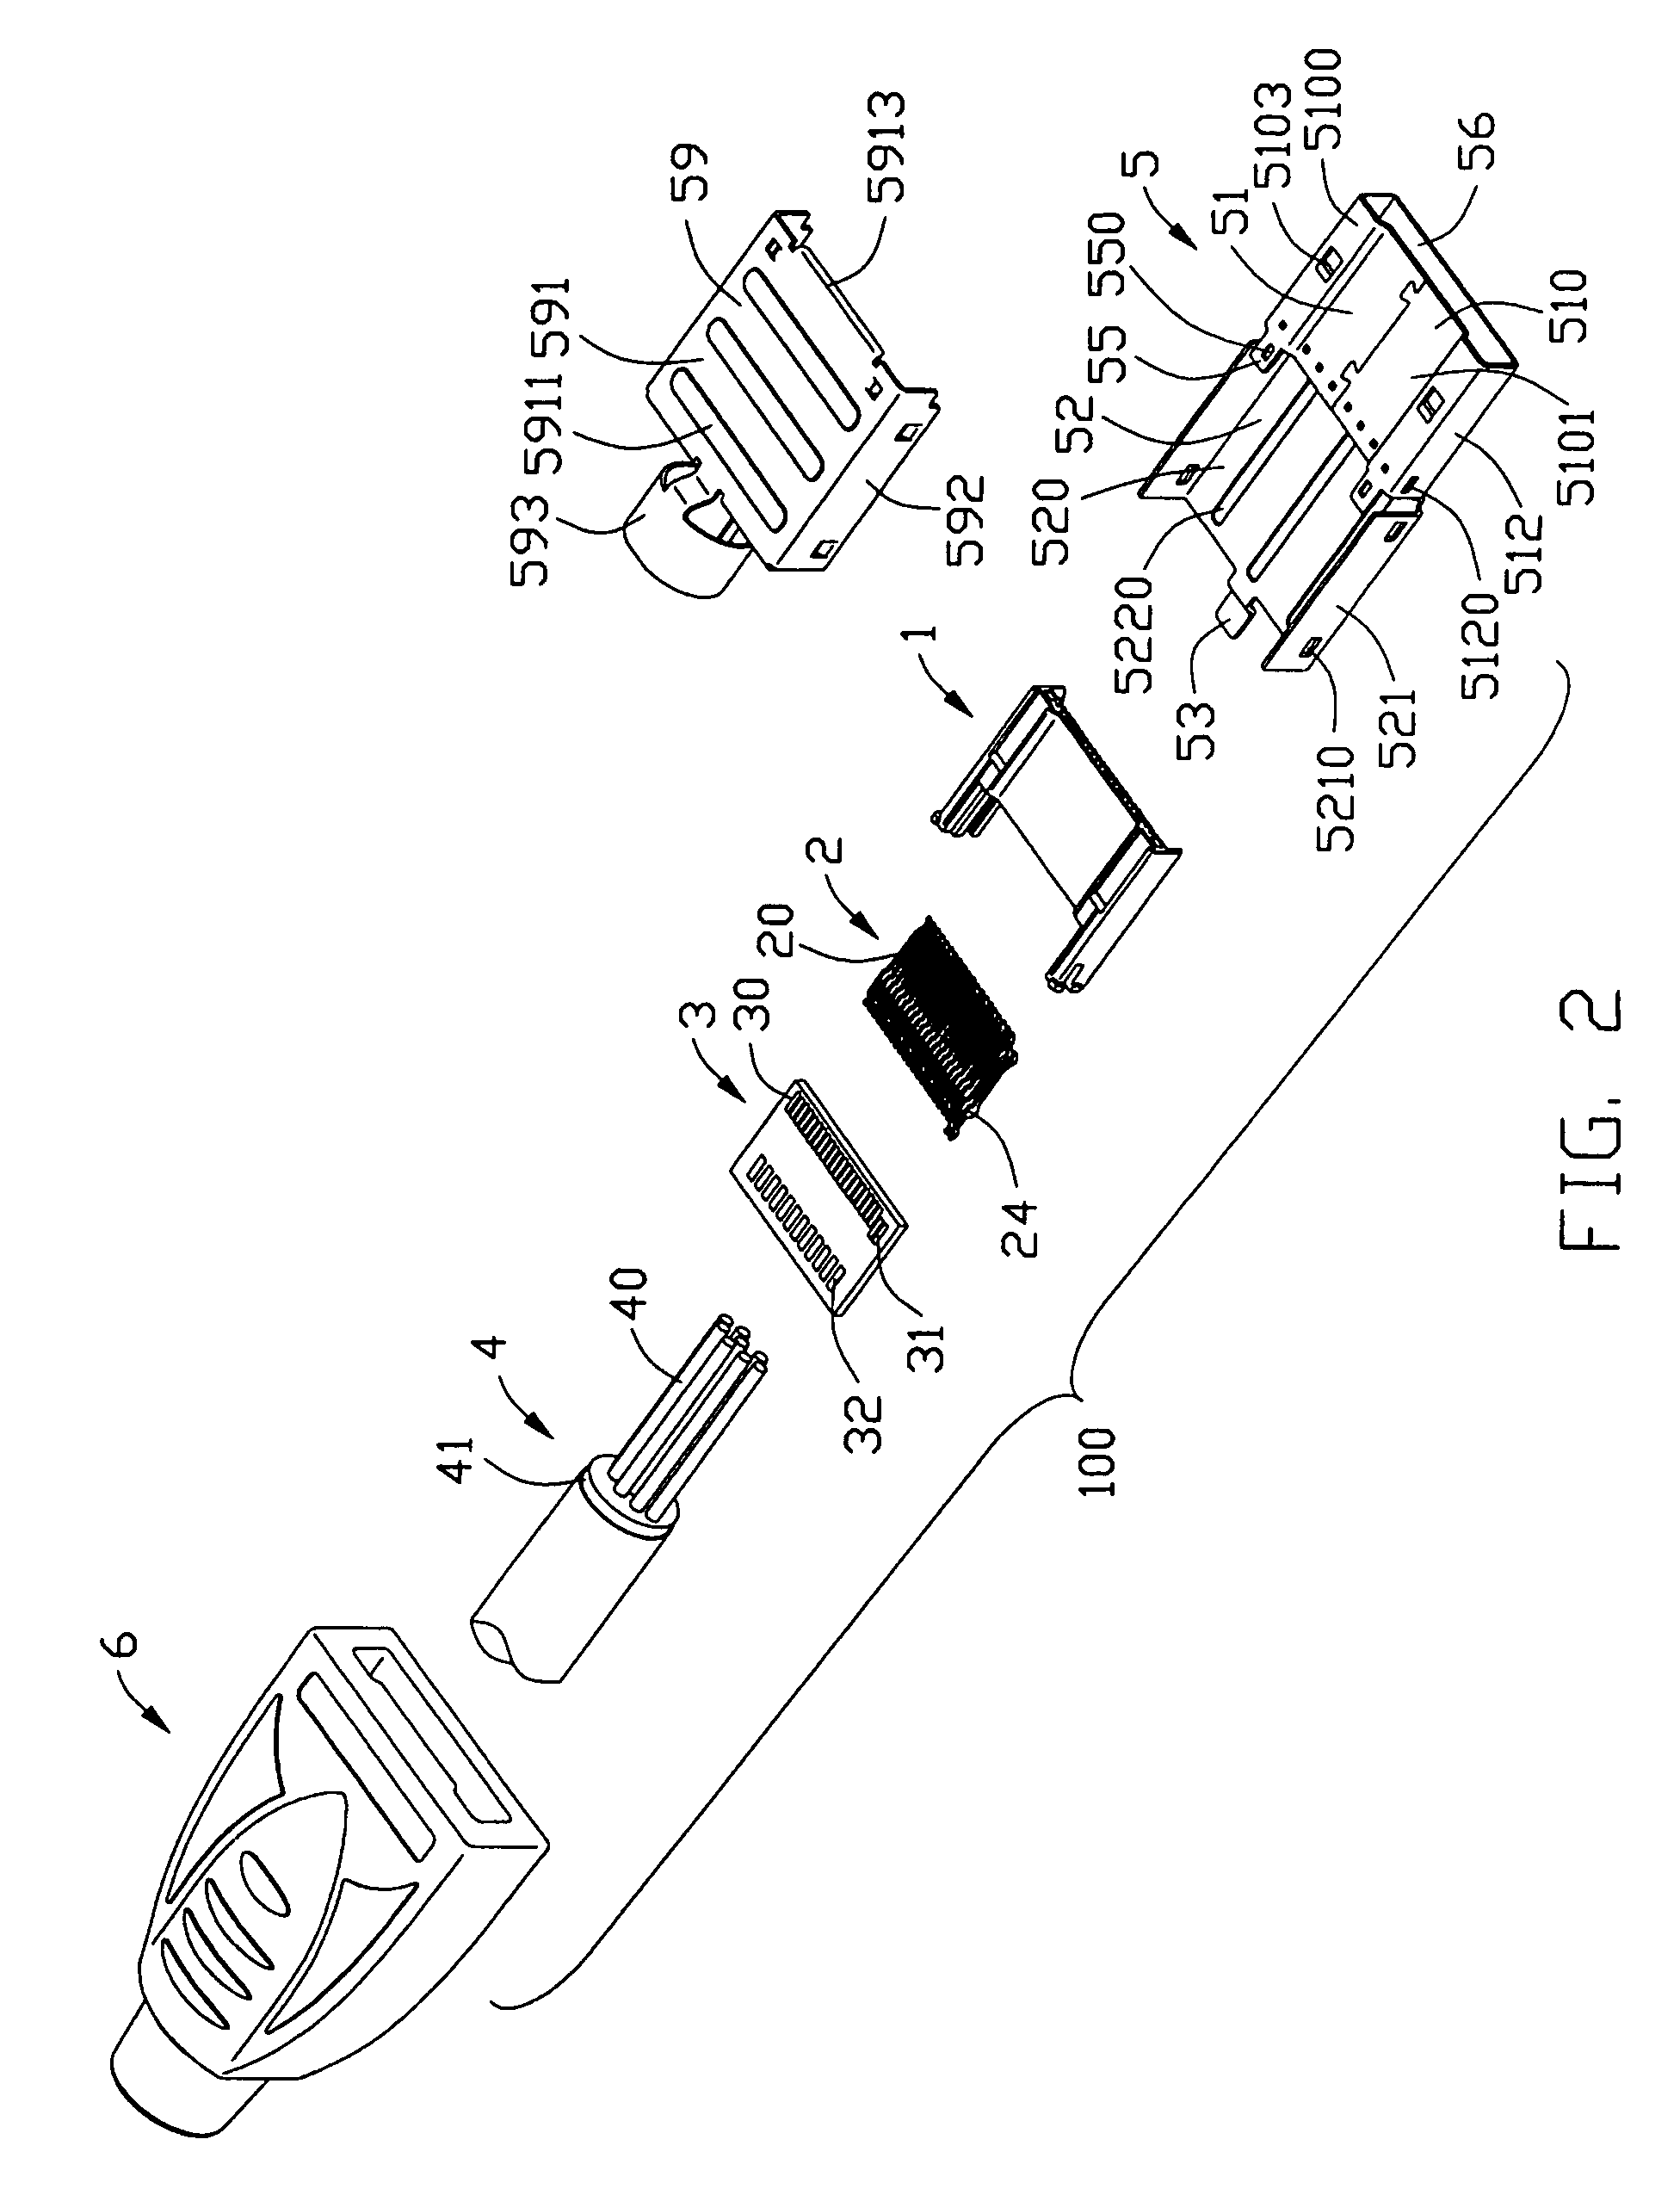 Electrical connector assembly with reduced crosstalk and electromaganectic interference